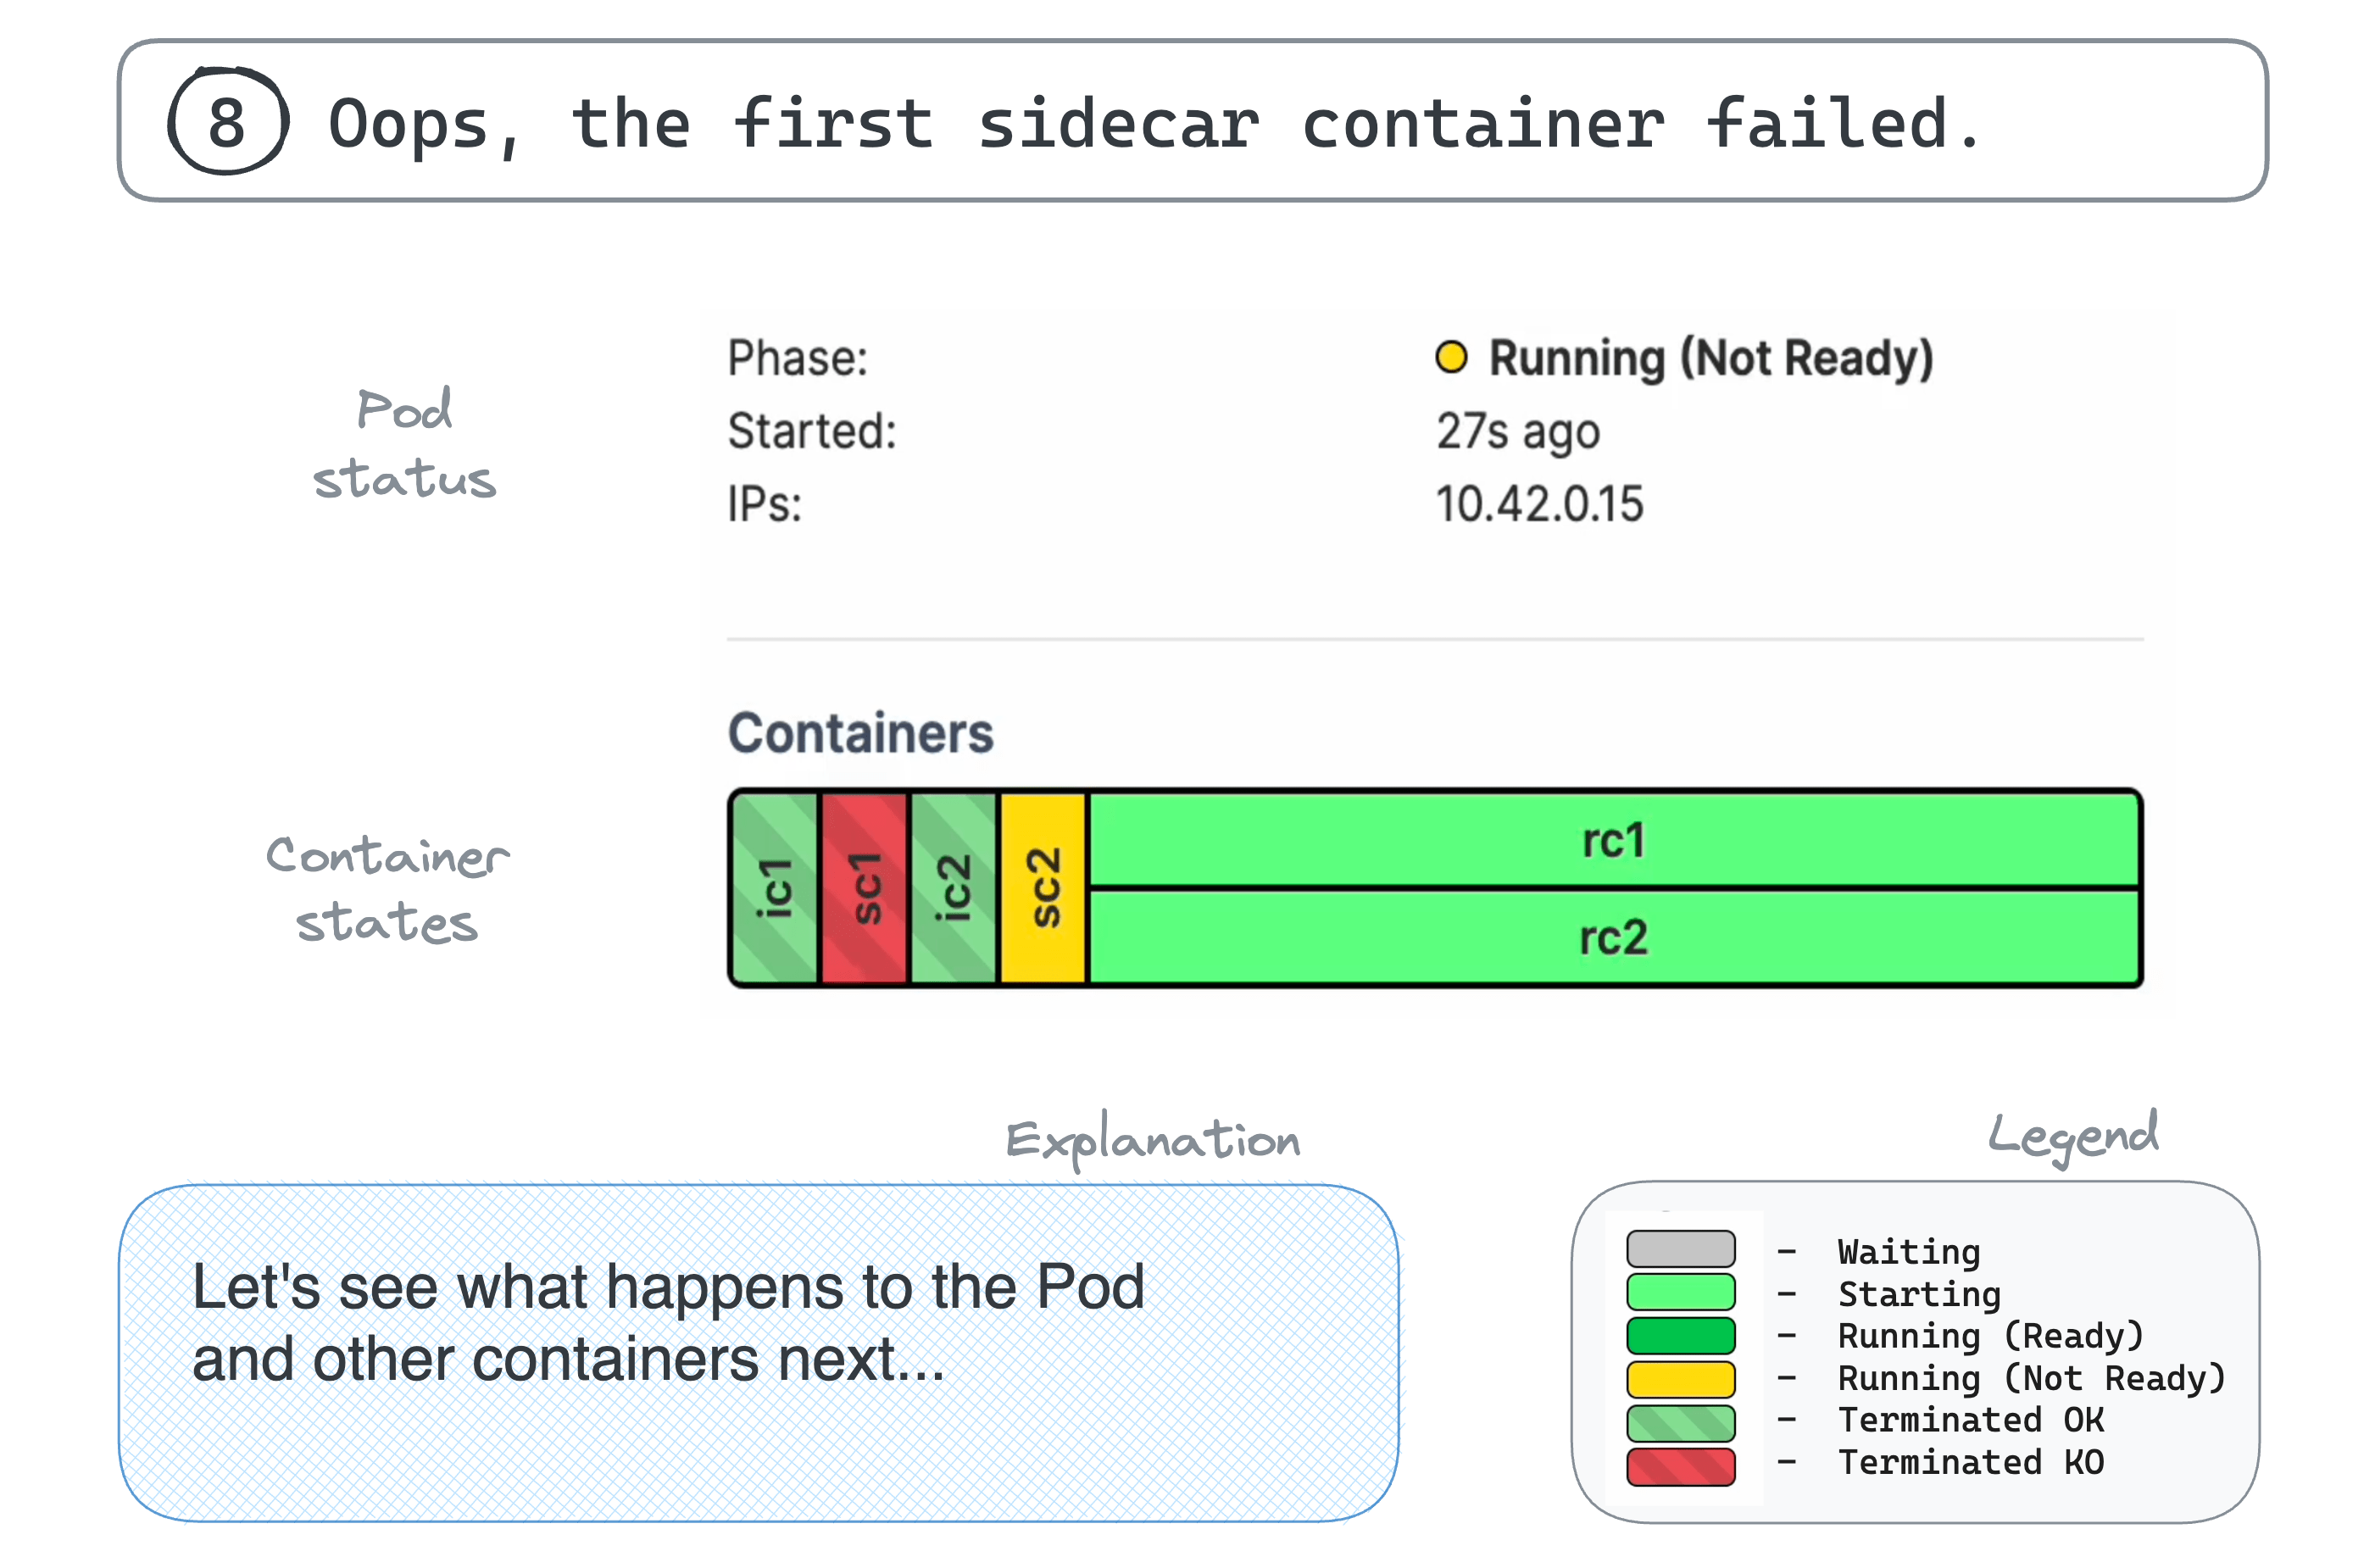 8. Oops, the first sidecar container failed.